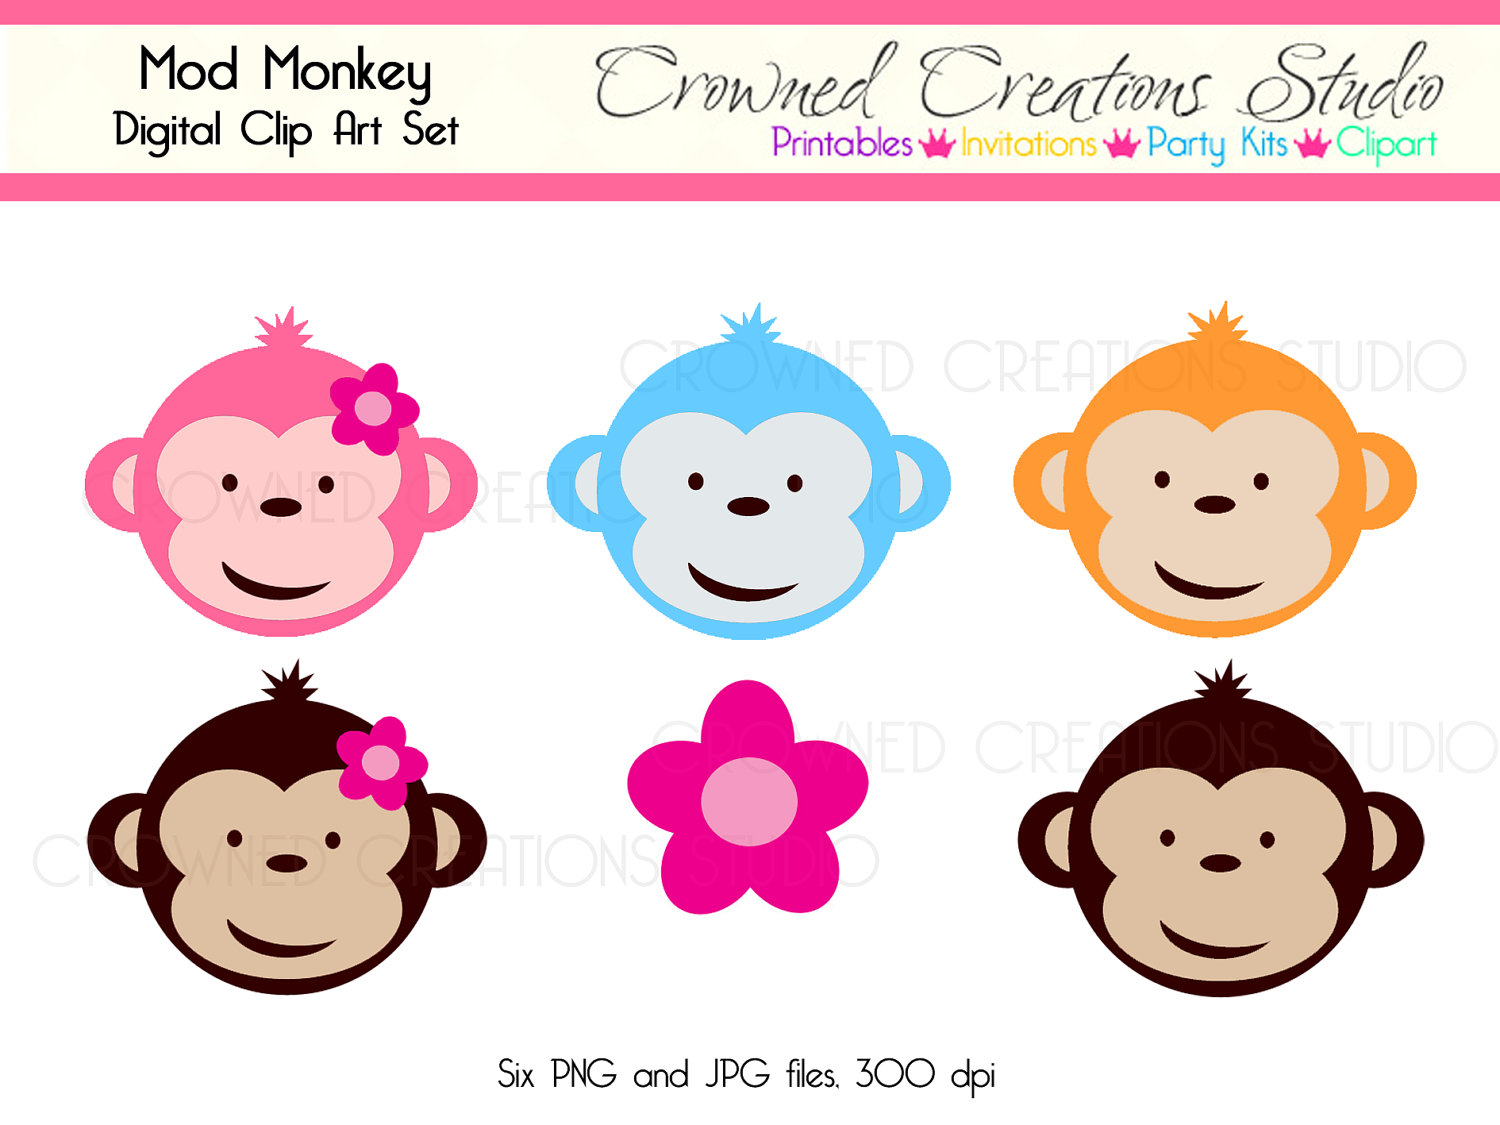 Mod Monkey Clip Art Set With Pink Flower By Crownedcreations